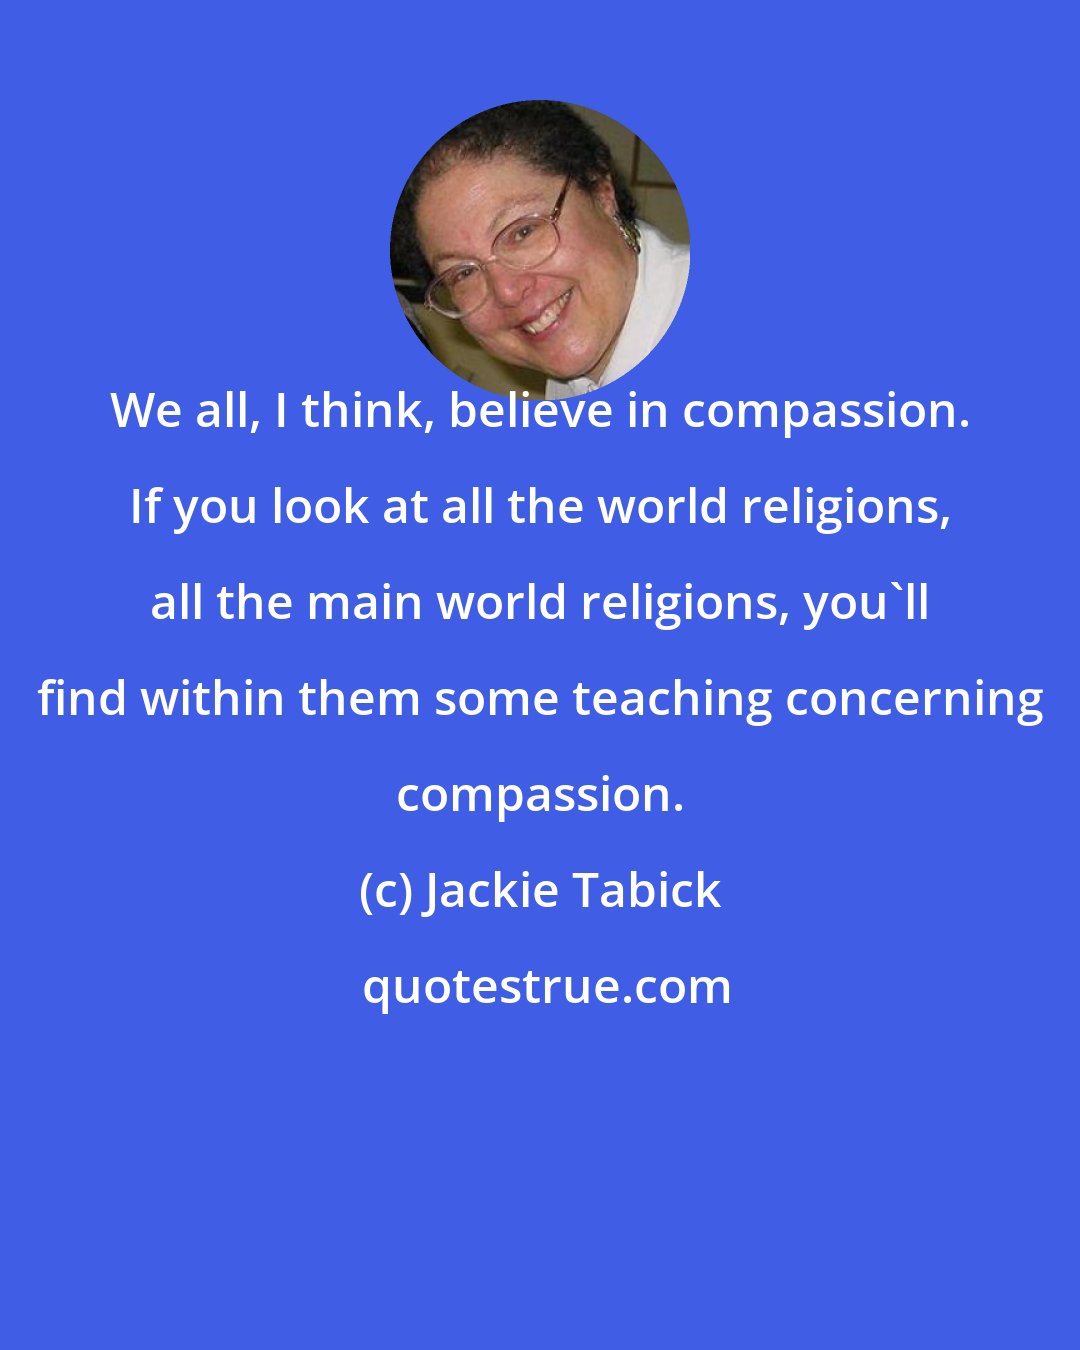 Jackie Tabick: We all, I think, believe in compassion. If you look at all the world religions, all the main world religions, you'll find within them some teaching concerning compassion.